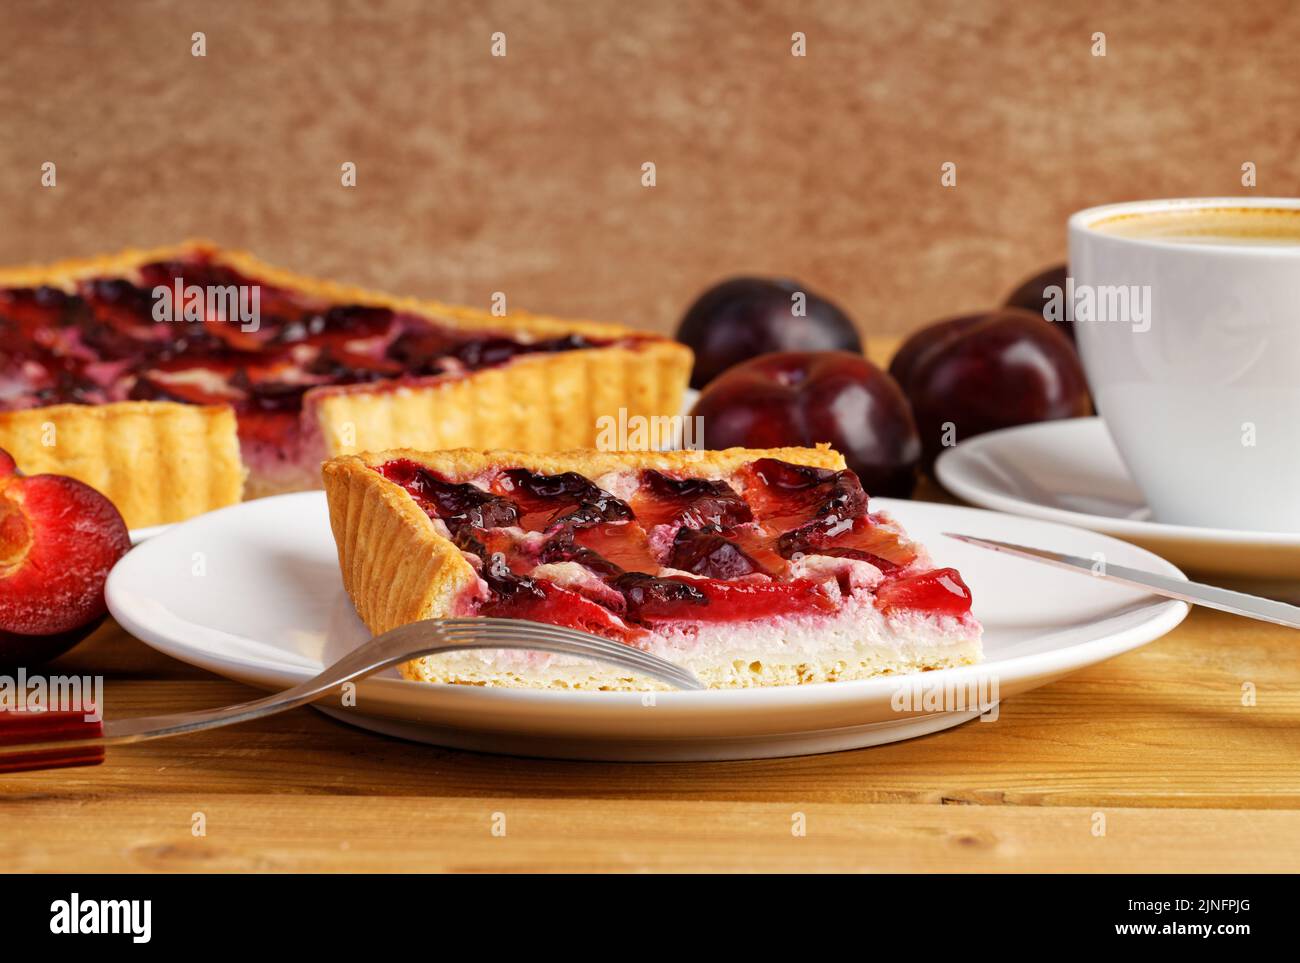 Closeup piece of homemade plum cake and cup of coffee on wooden table. Shallow focus. Stock Photo